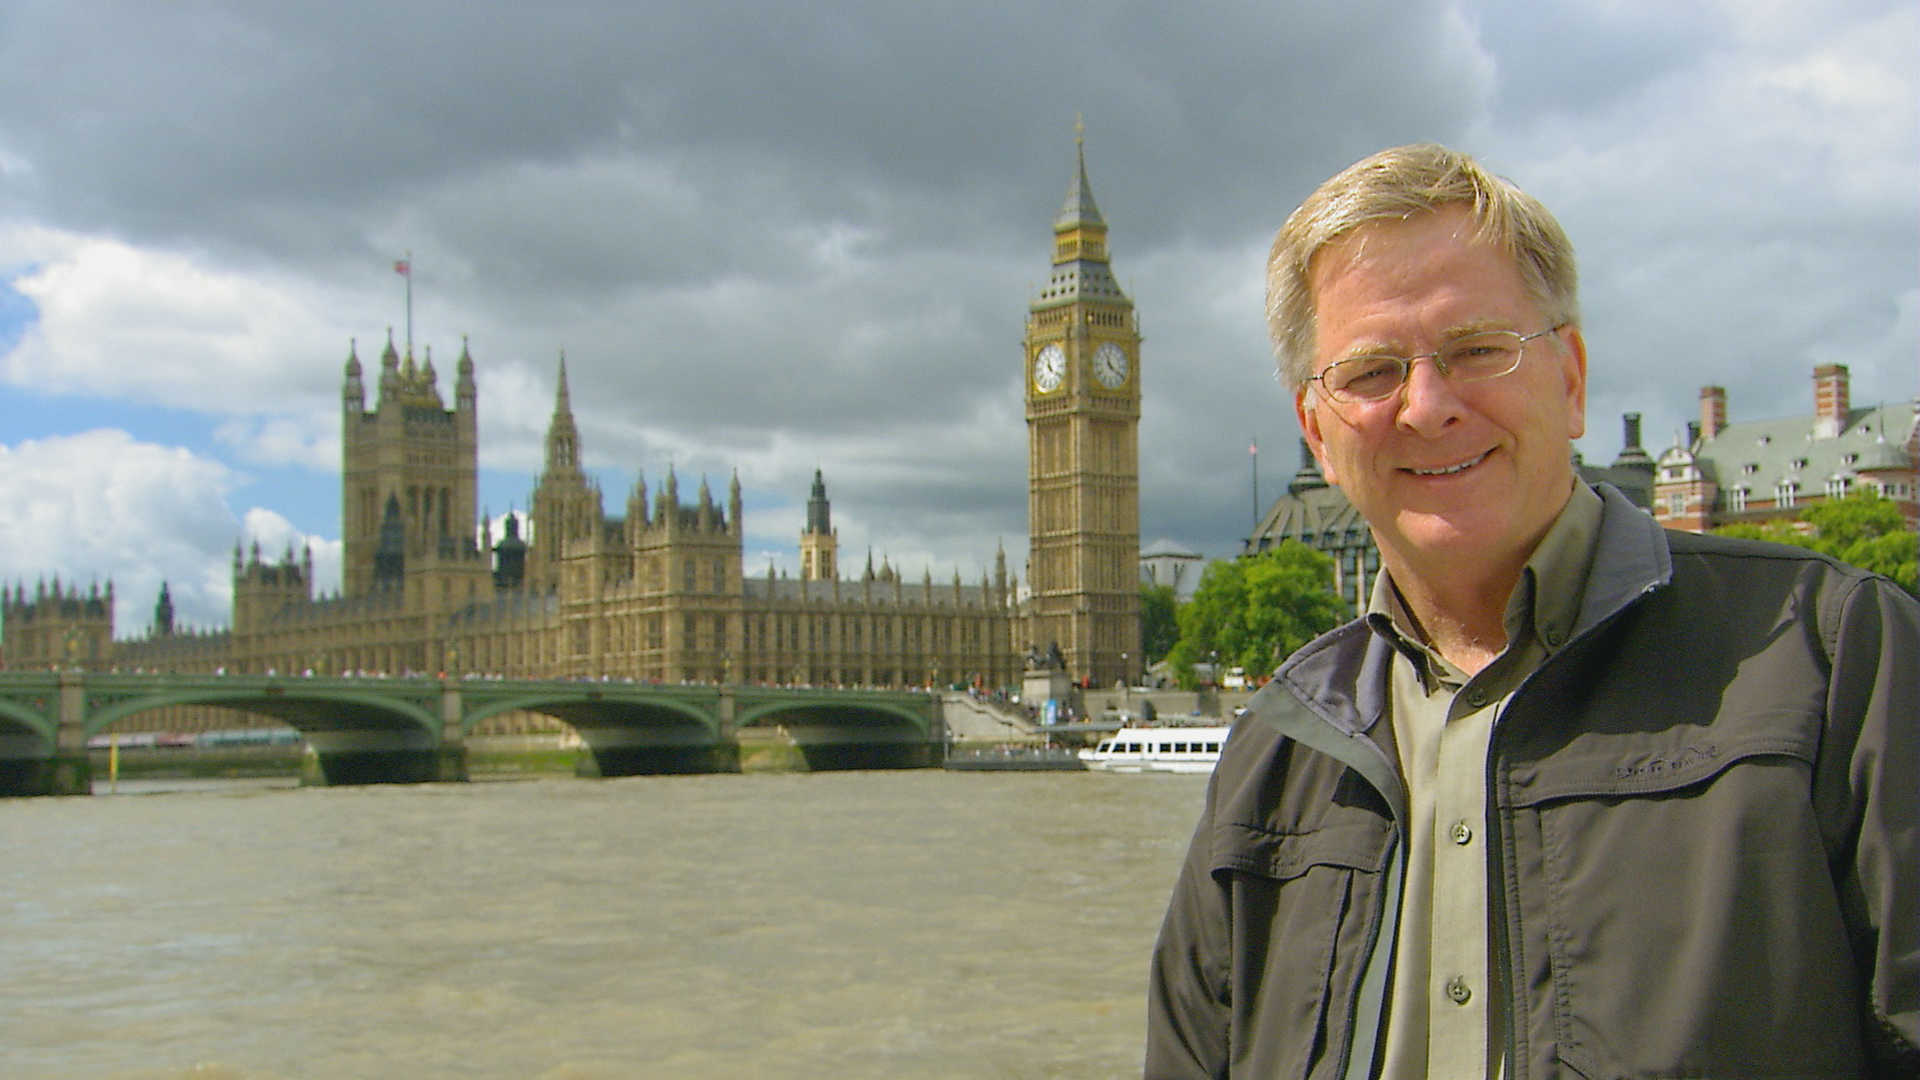 London: Rick Steves and the Parliament buildings